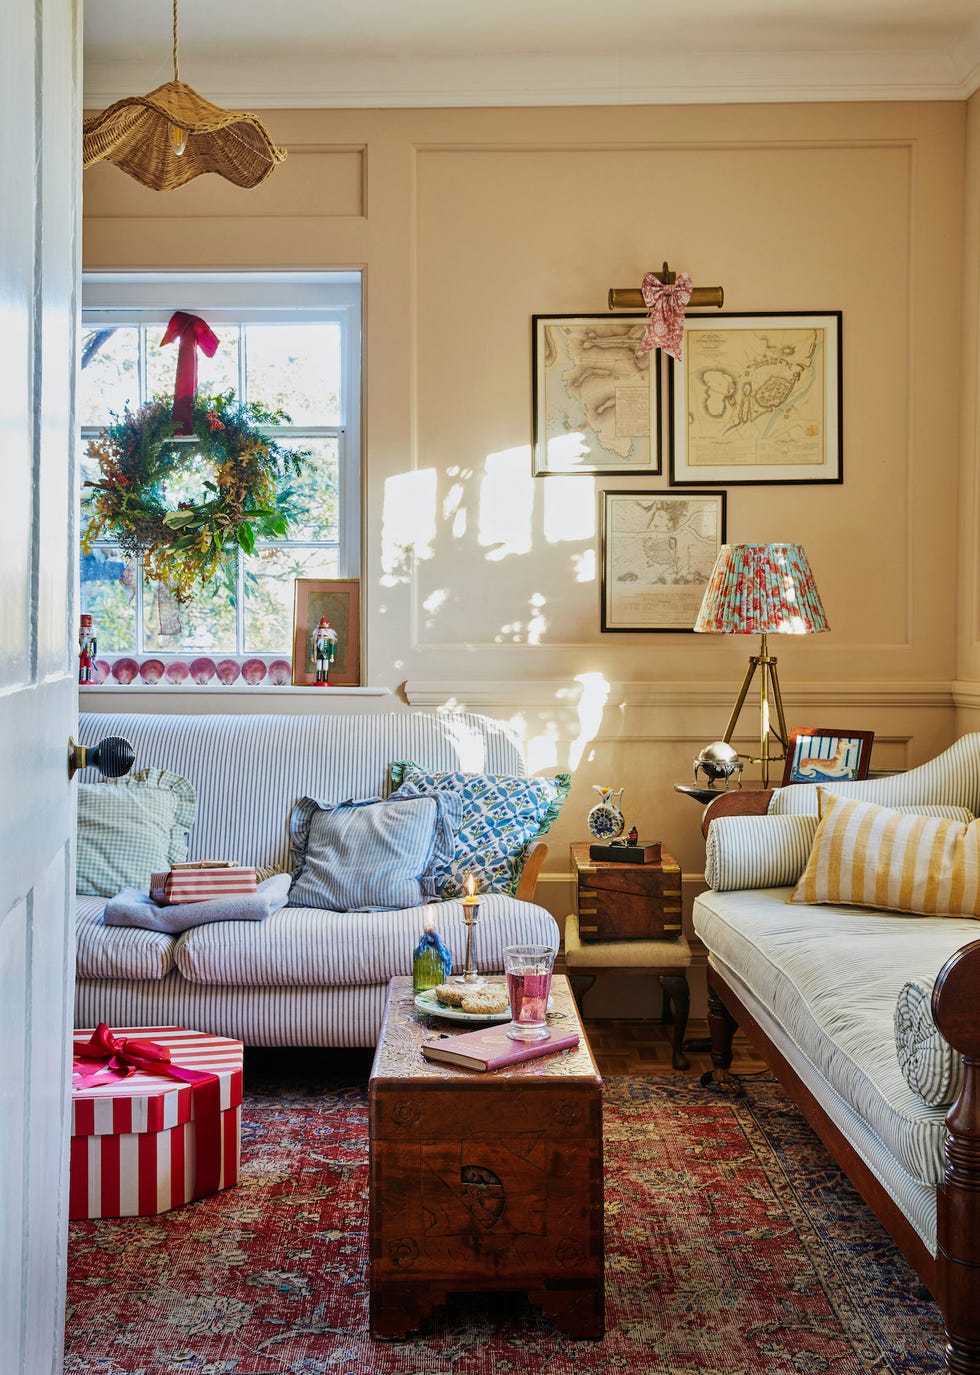 Step into a full-on decorative Christmas at Mulberry House